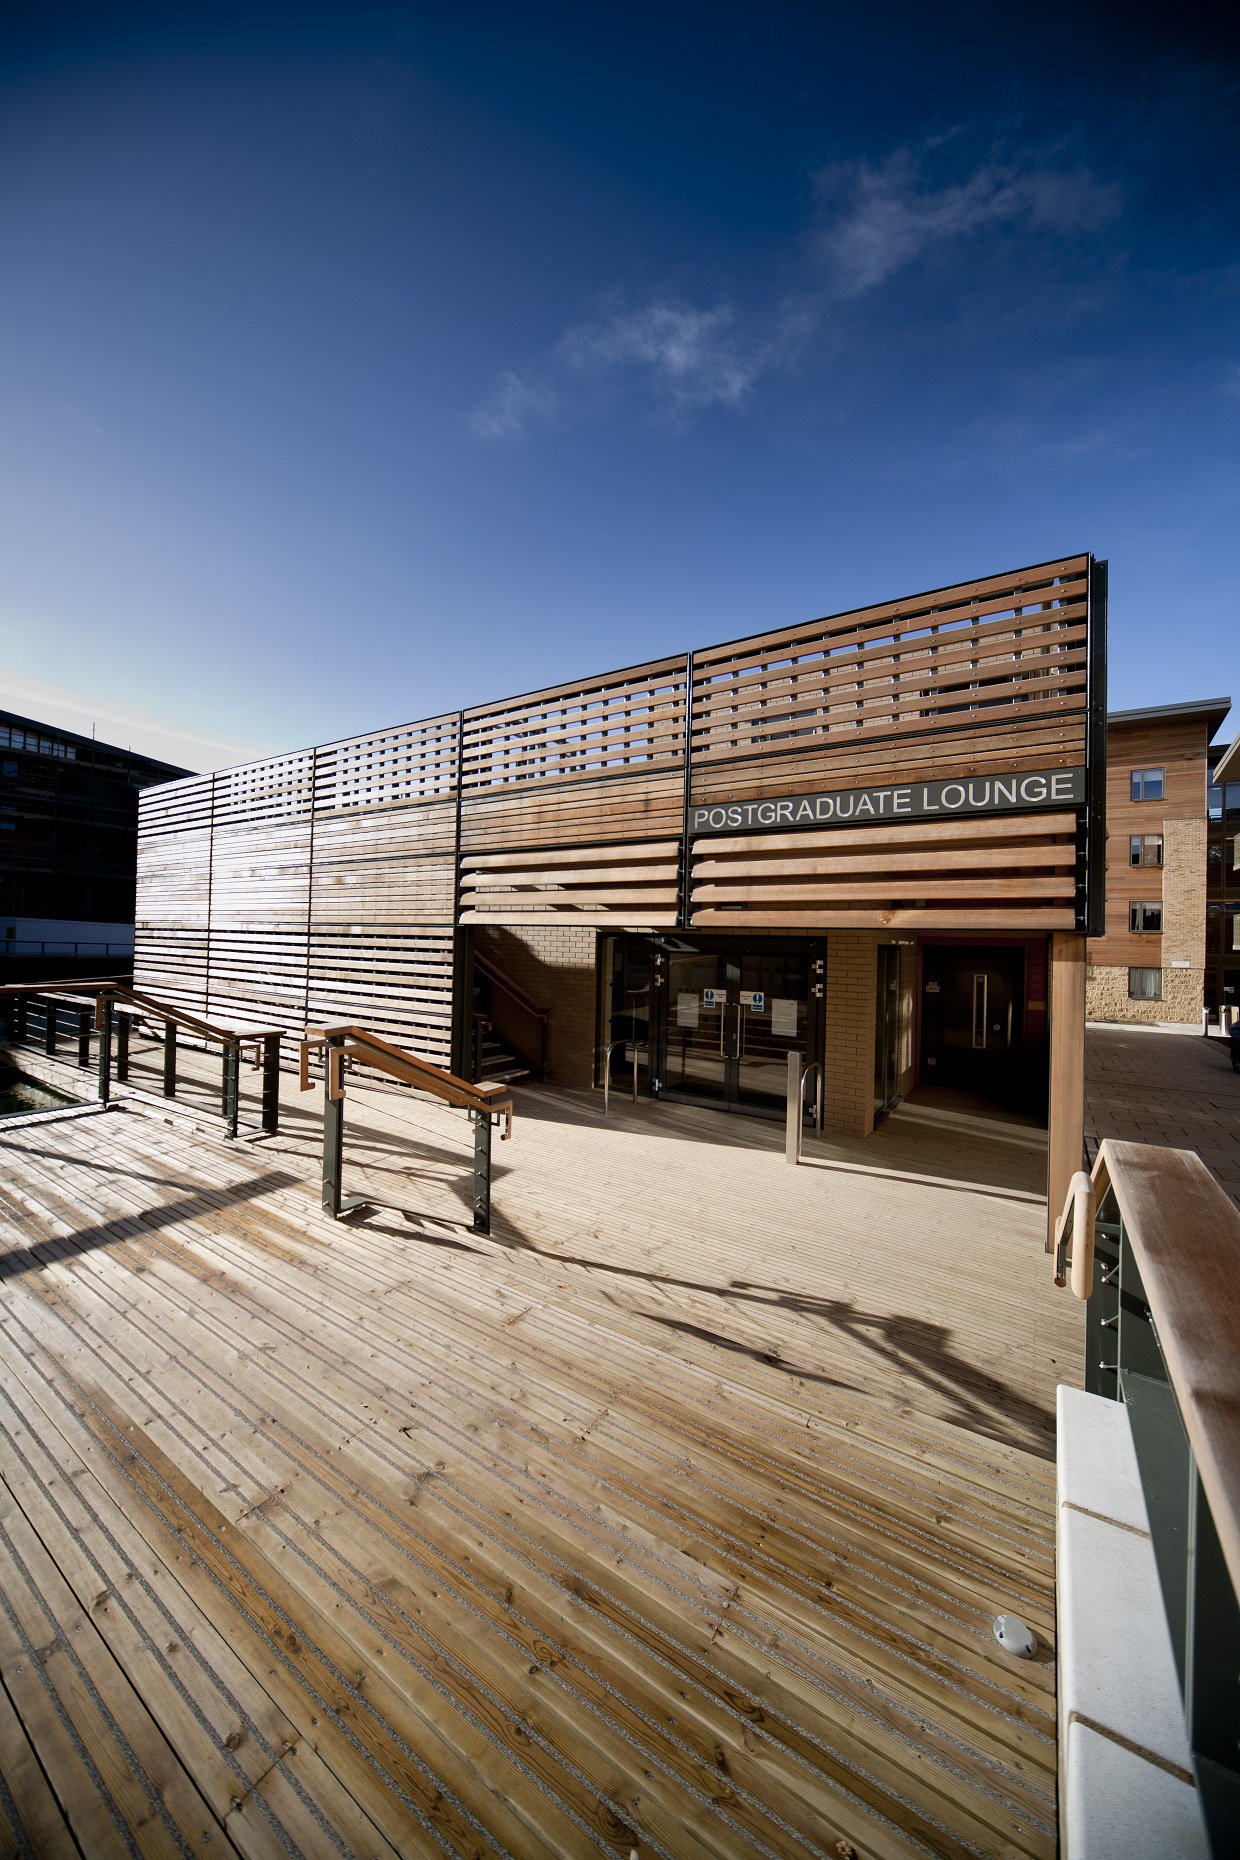 Oxford Brookes University ensured a smooth finish with Marley CitiDeck®